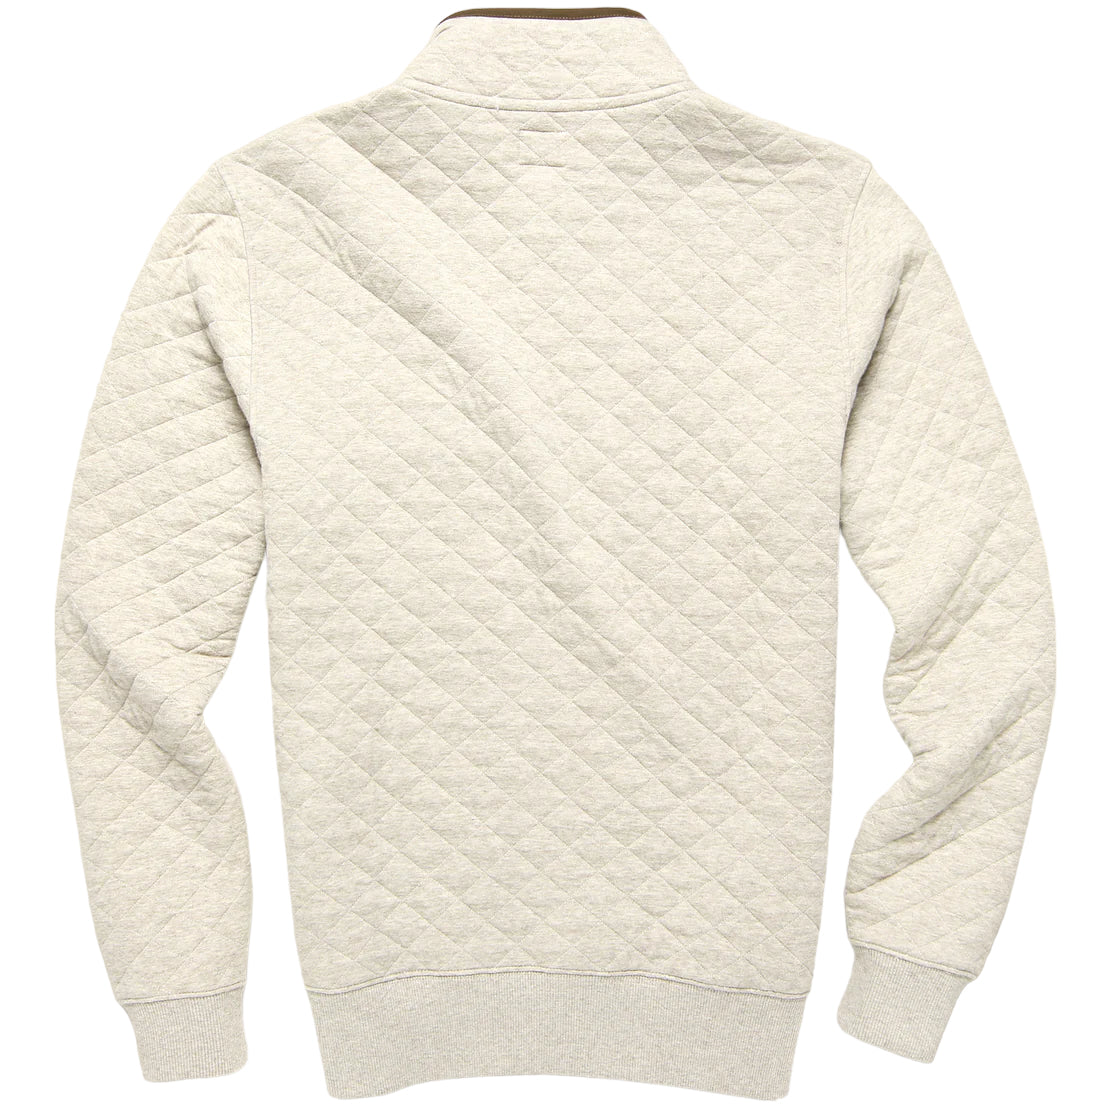 EPIC QUILTED FLEECE PULLOVER